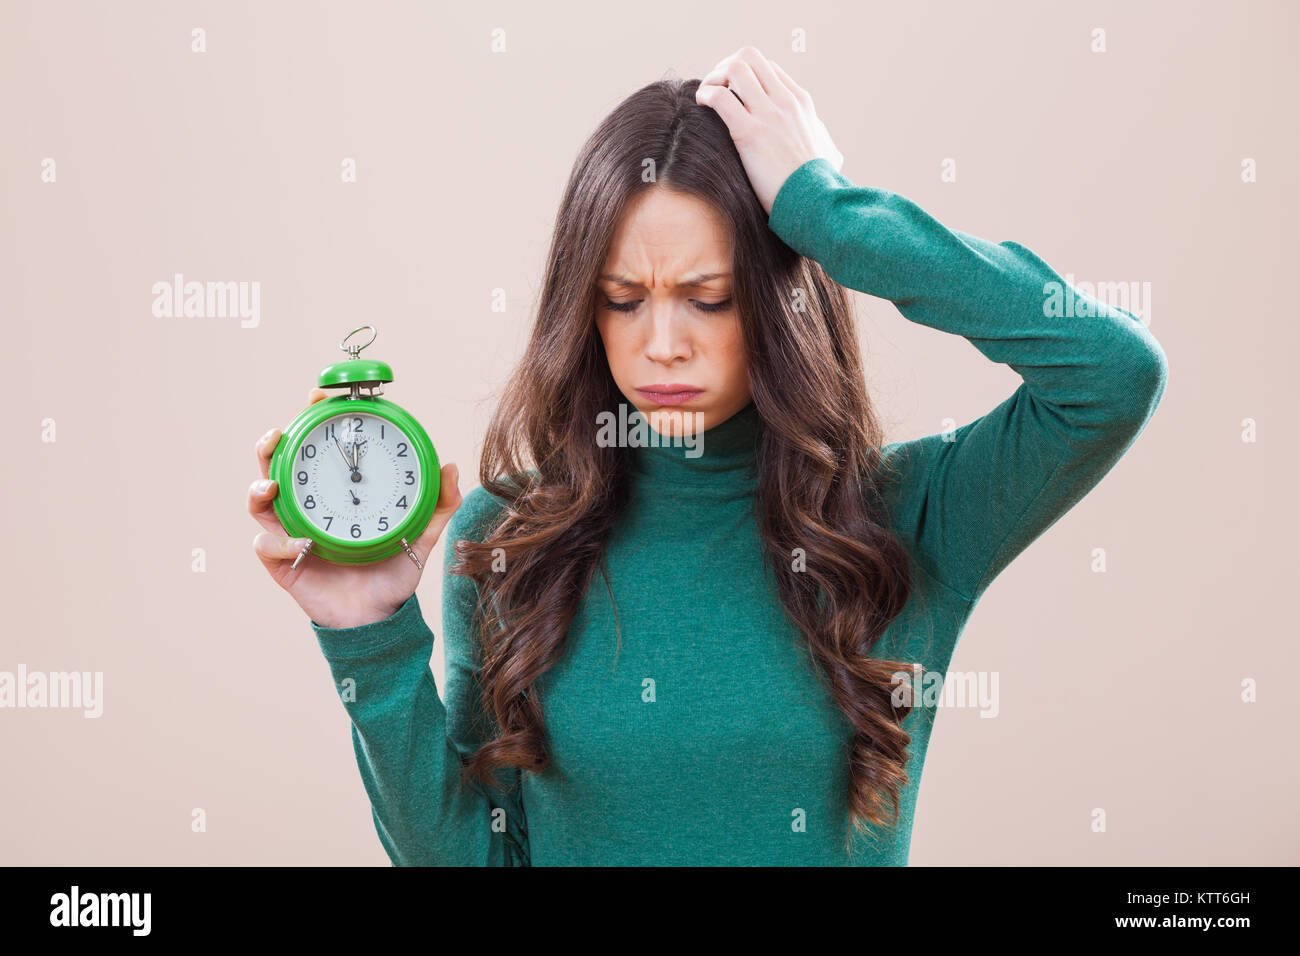 Woman holding clock that shows five to twelve time Stock Photo